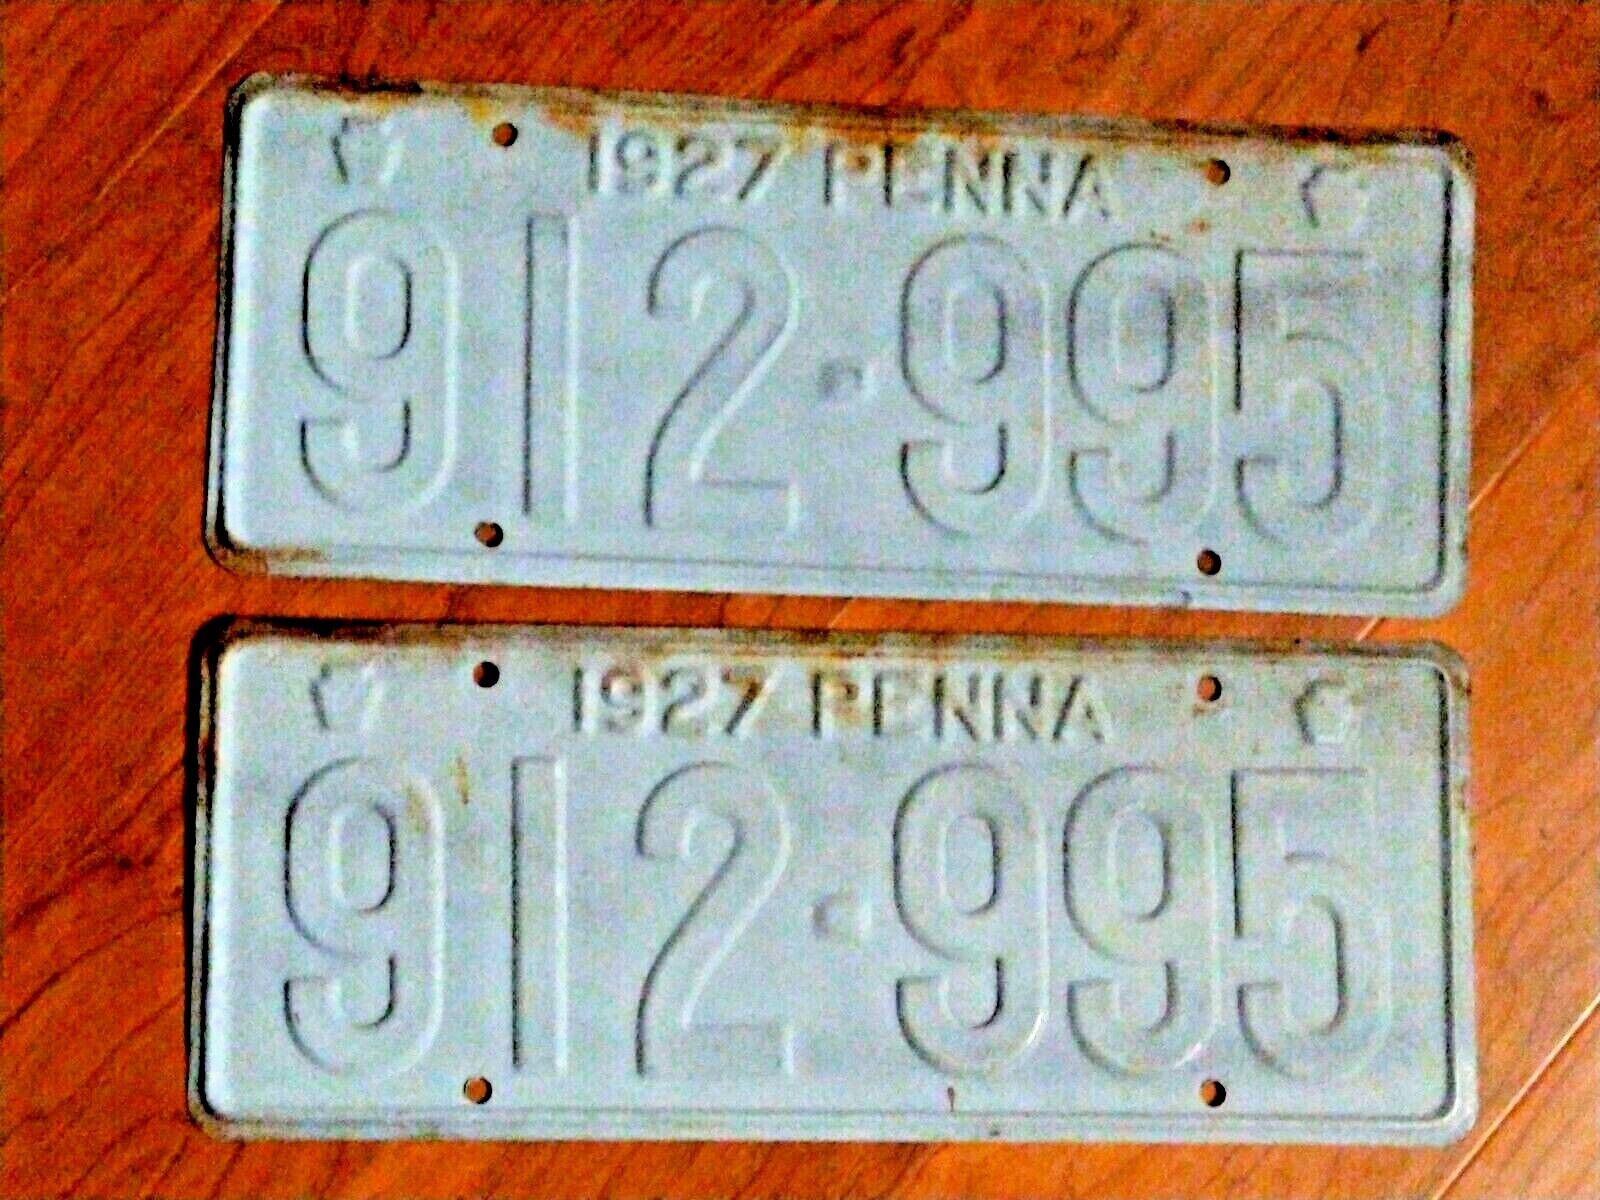 1927 Pennsylvania Penna License Plate 912995 ACTION FOR 1 PLATE 2 PLATE IN STOCK